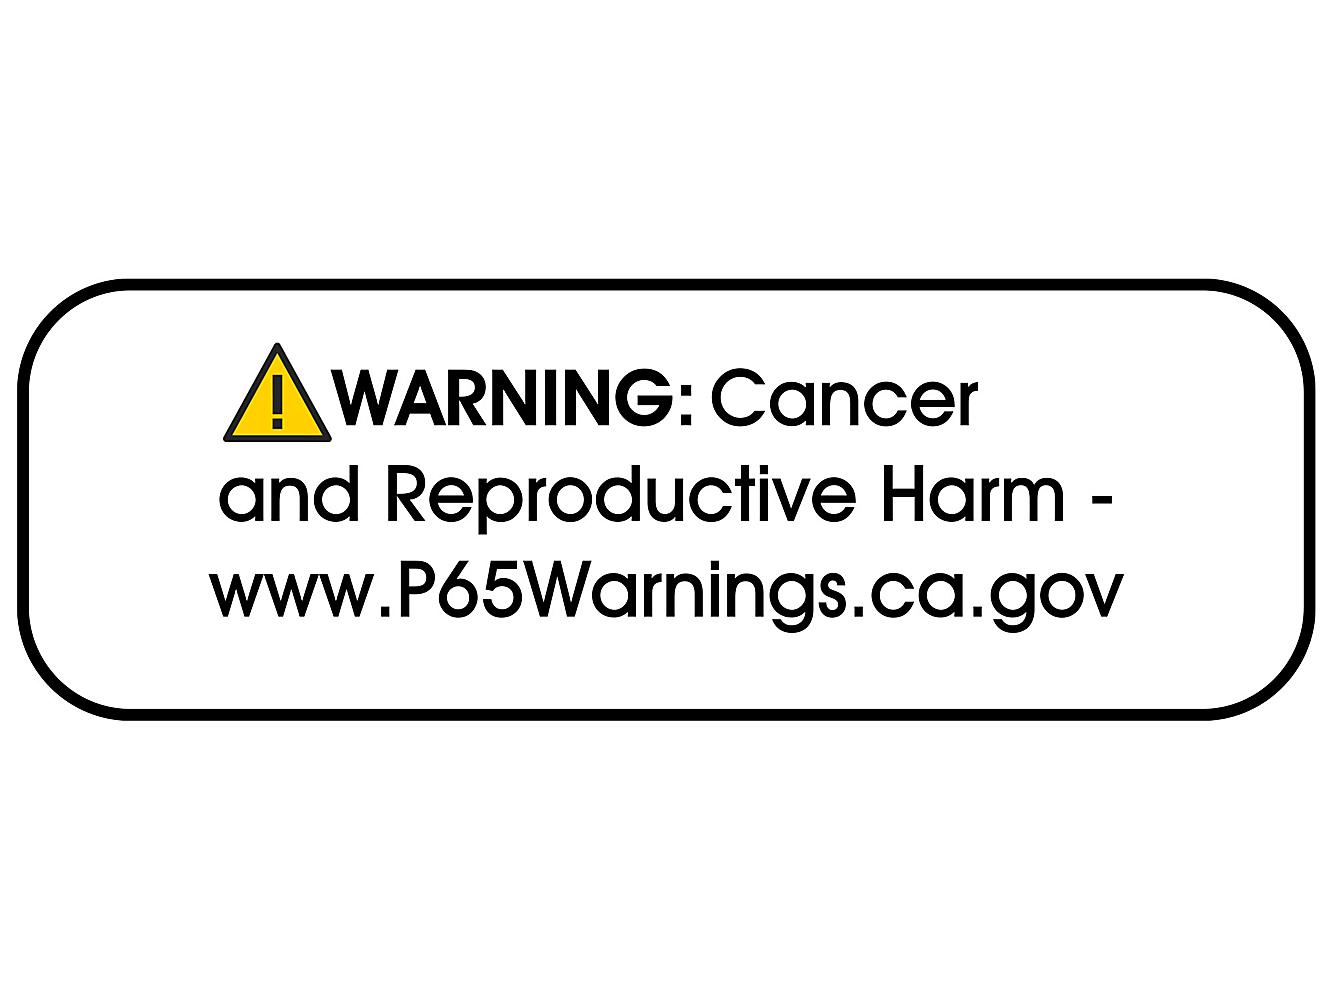 California Prop 65 Labels - "Warning: Cancer and Reproductive Harm", 1 1/2 x 1/2" S-22726 - Uline